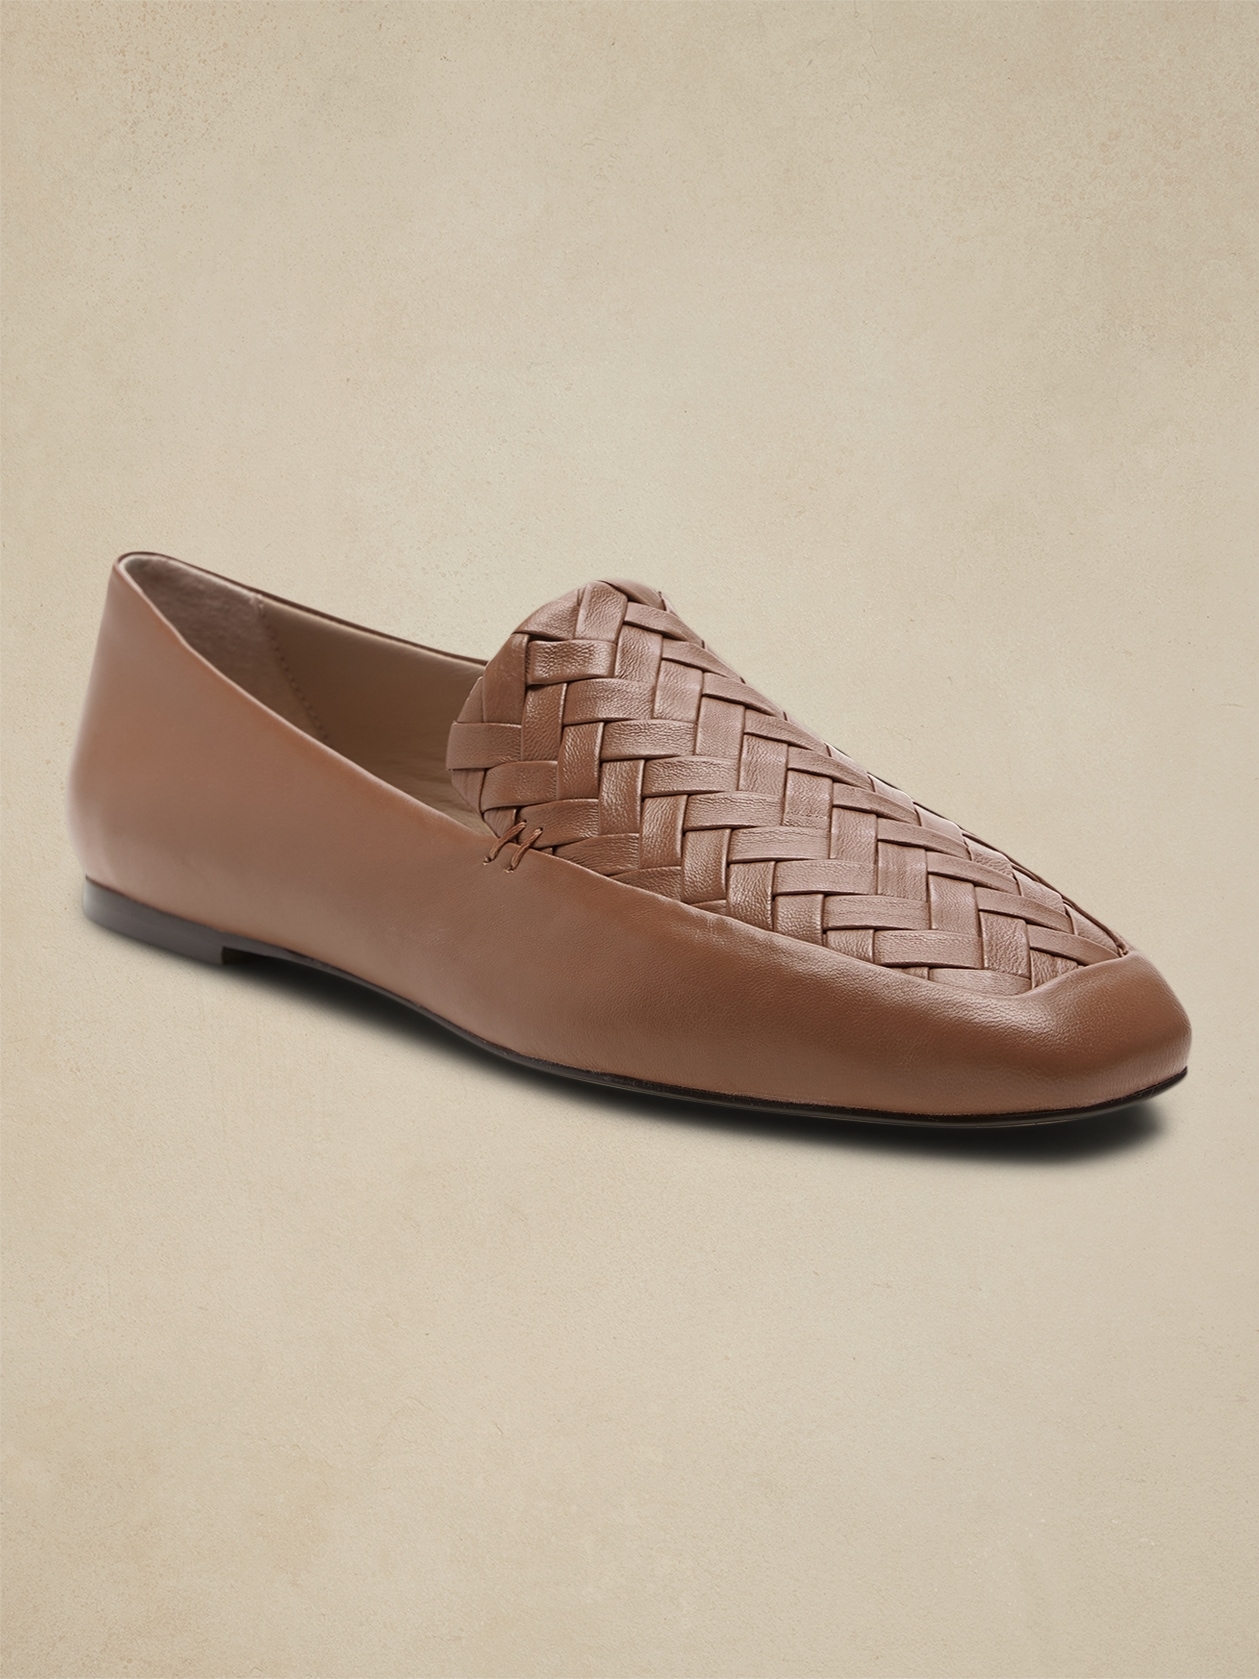 Woven Leather Soft Loafer